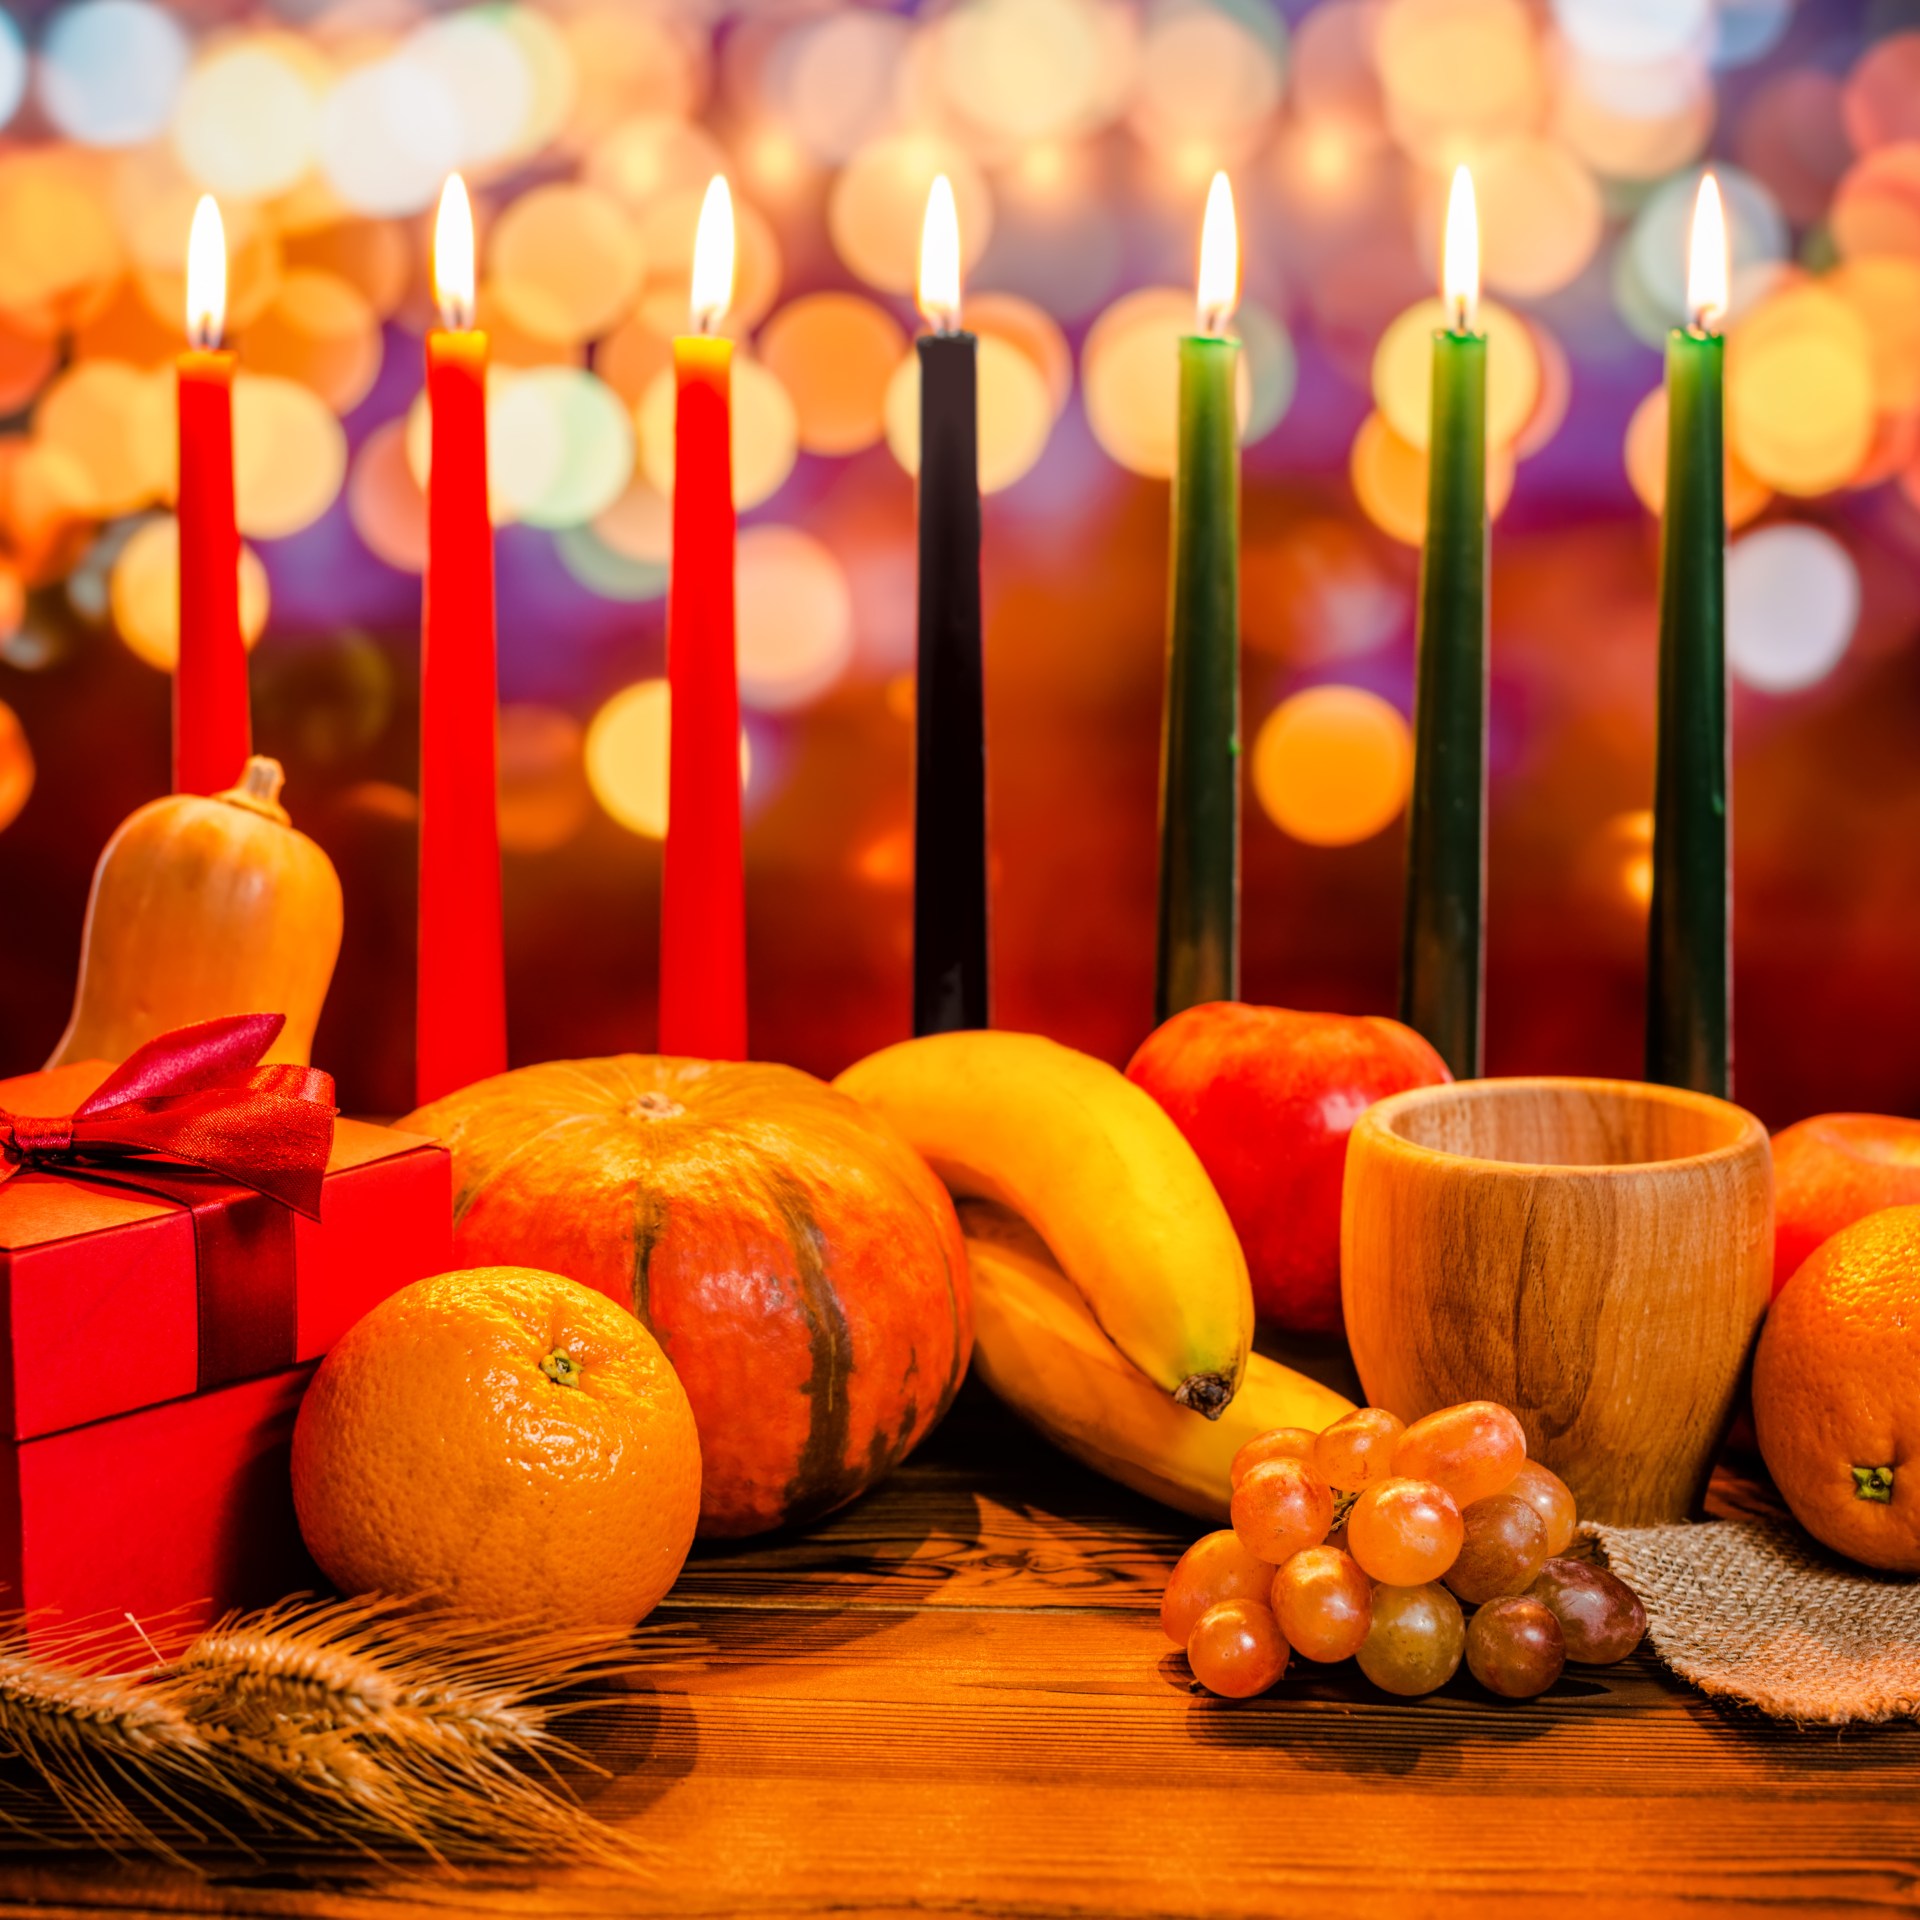 Kwanzaa,Holiday,Concept,With,Decorate,Seven,Candles,Red,,Black,And